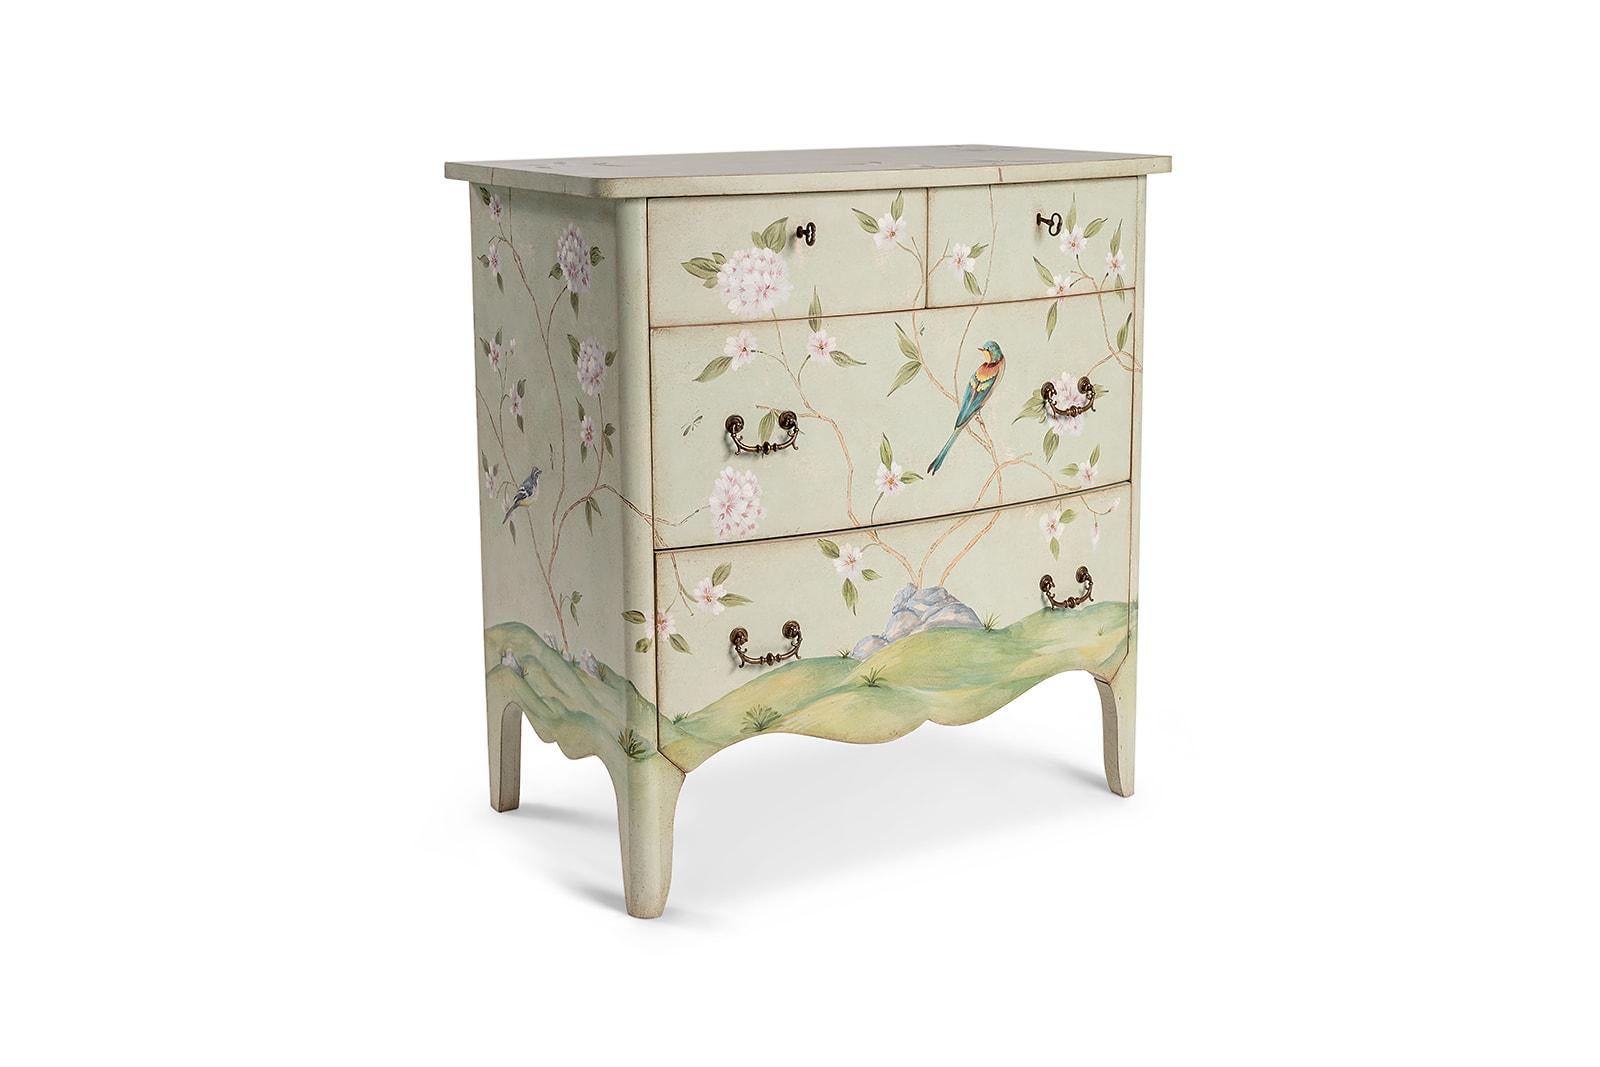 From our Hand-Painted Furniture Collection, we are pleased to introduce you to our Light Blue Dorsoduro Chest of Drawers. 
This beautiful piece echoes the sweetness of those still sunday mornings - when the morning light let the spring delicate